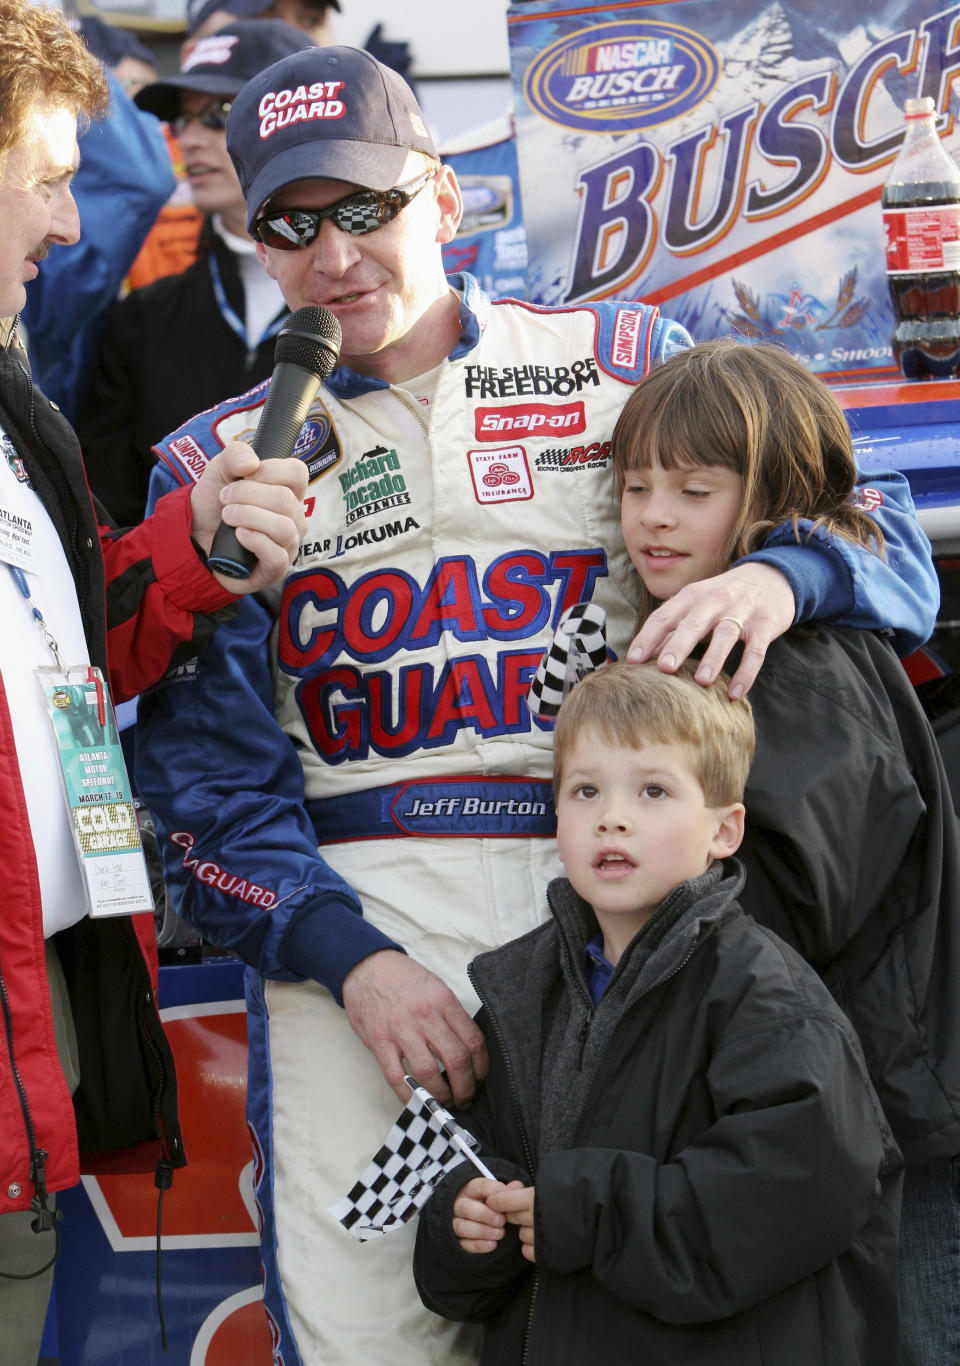 FILE - In this March 18, 2006, file photo, Jeff Burton puts his arm around his children Paige, 10, and Harrison, 5, as he is interviewed in victory lane after winning the NASCAR Busch Series' Nicorette 300 auto race at Atlanta Motor Speedway in Hampton, Ga., in this Saturday, March 18, 2006, file photo. Harrison Burton is set to make his NASCAR Cup Series debut at Talladega Superspeedway. (AP Photo/Gene Blythe, File)